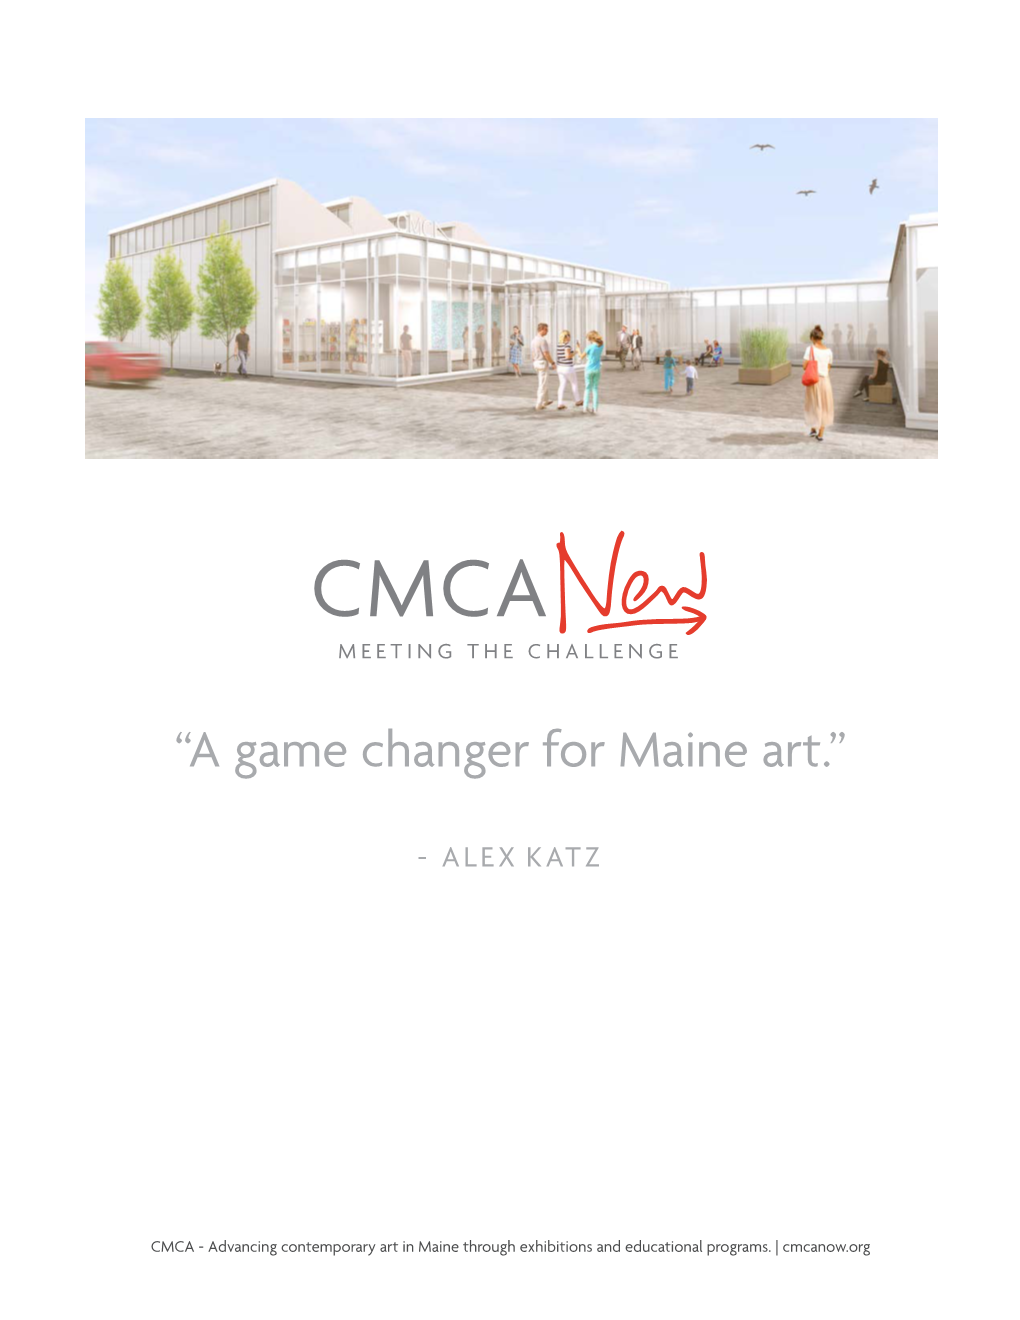 “A Game Changer for Maine Art.”